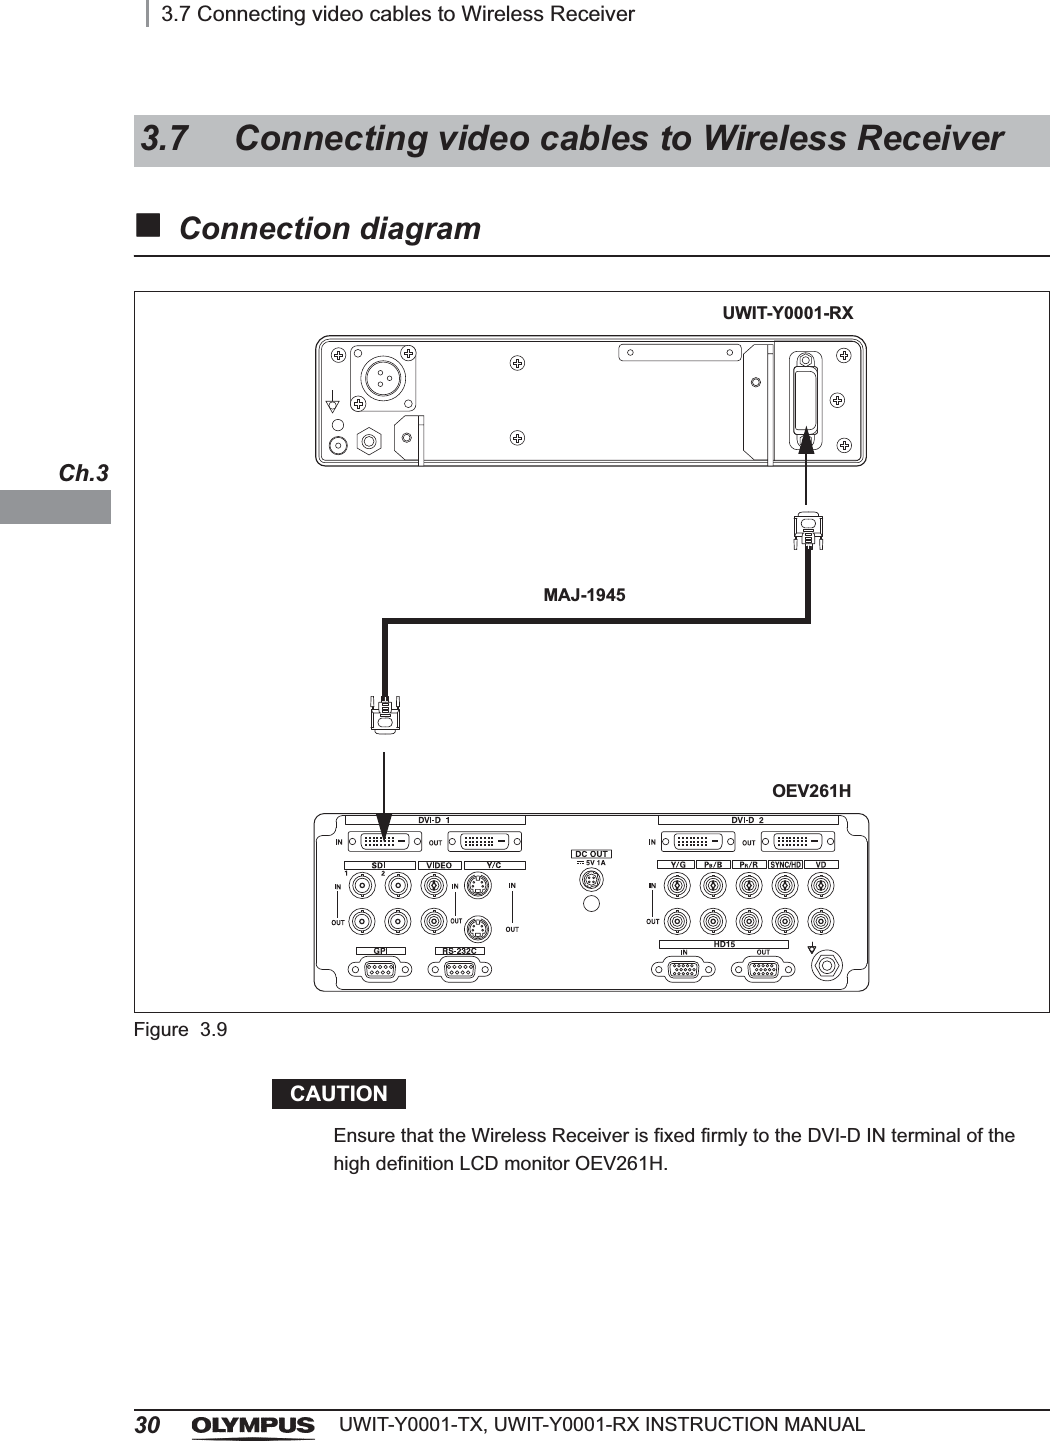 303.7 Connecting video cables to Wireless ReceiverUWIT-Y0001-TX, UWIT-Y0001-RX INSTRUCTION MANUALCh.3Connection diagramFigure 3.9CAUTIONEnsure that the Wireless Receiver is fixed firmly to the DVI-D IN terminal of the high definition LCD monitor OEV261H.3.7 Connecting video cables to Wireless ReceiverUWIT-Y0001-RXMAJ-1945OEV261H